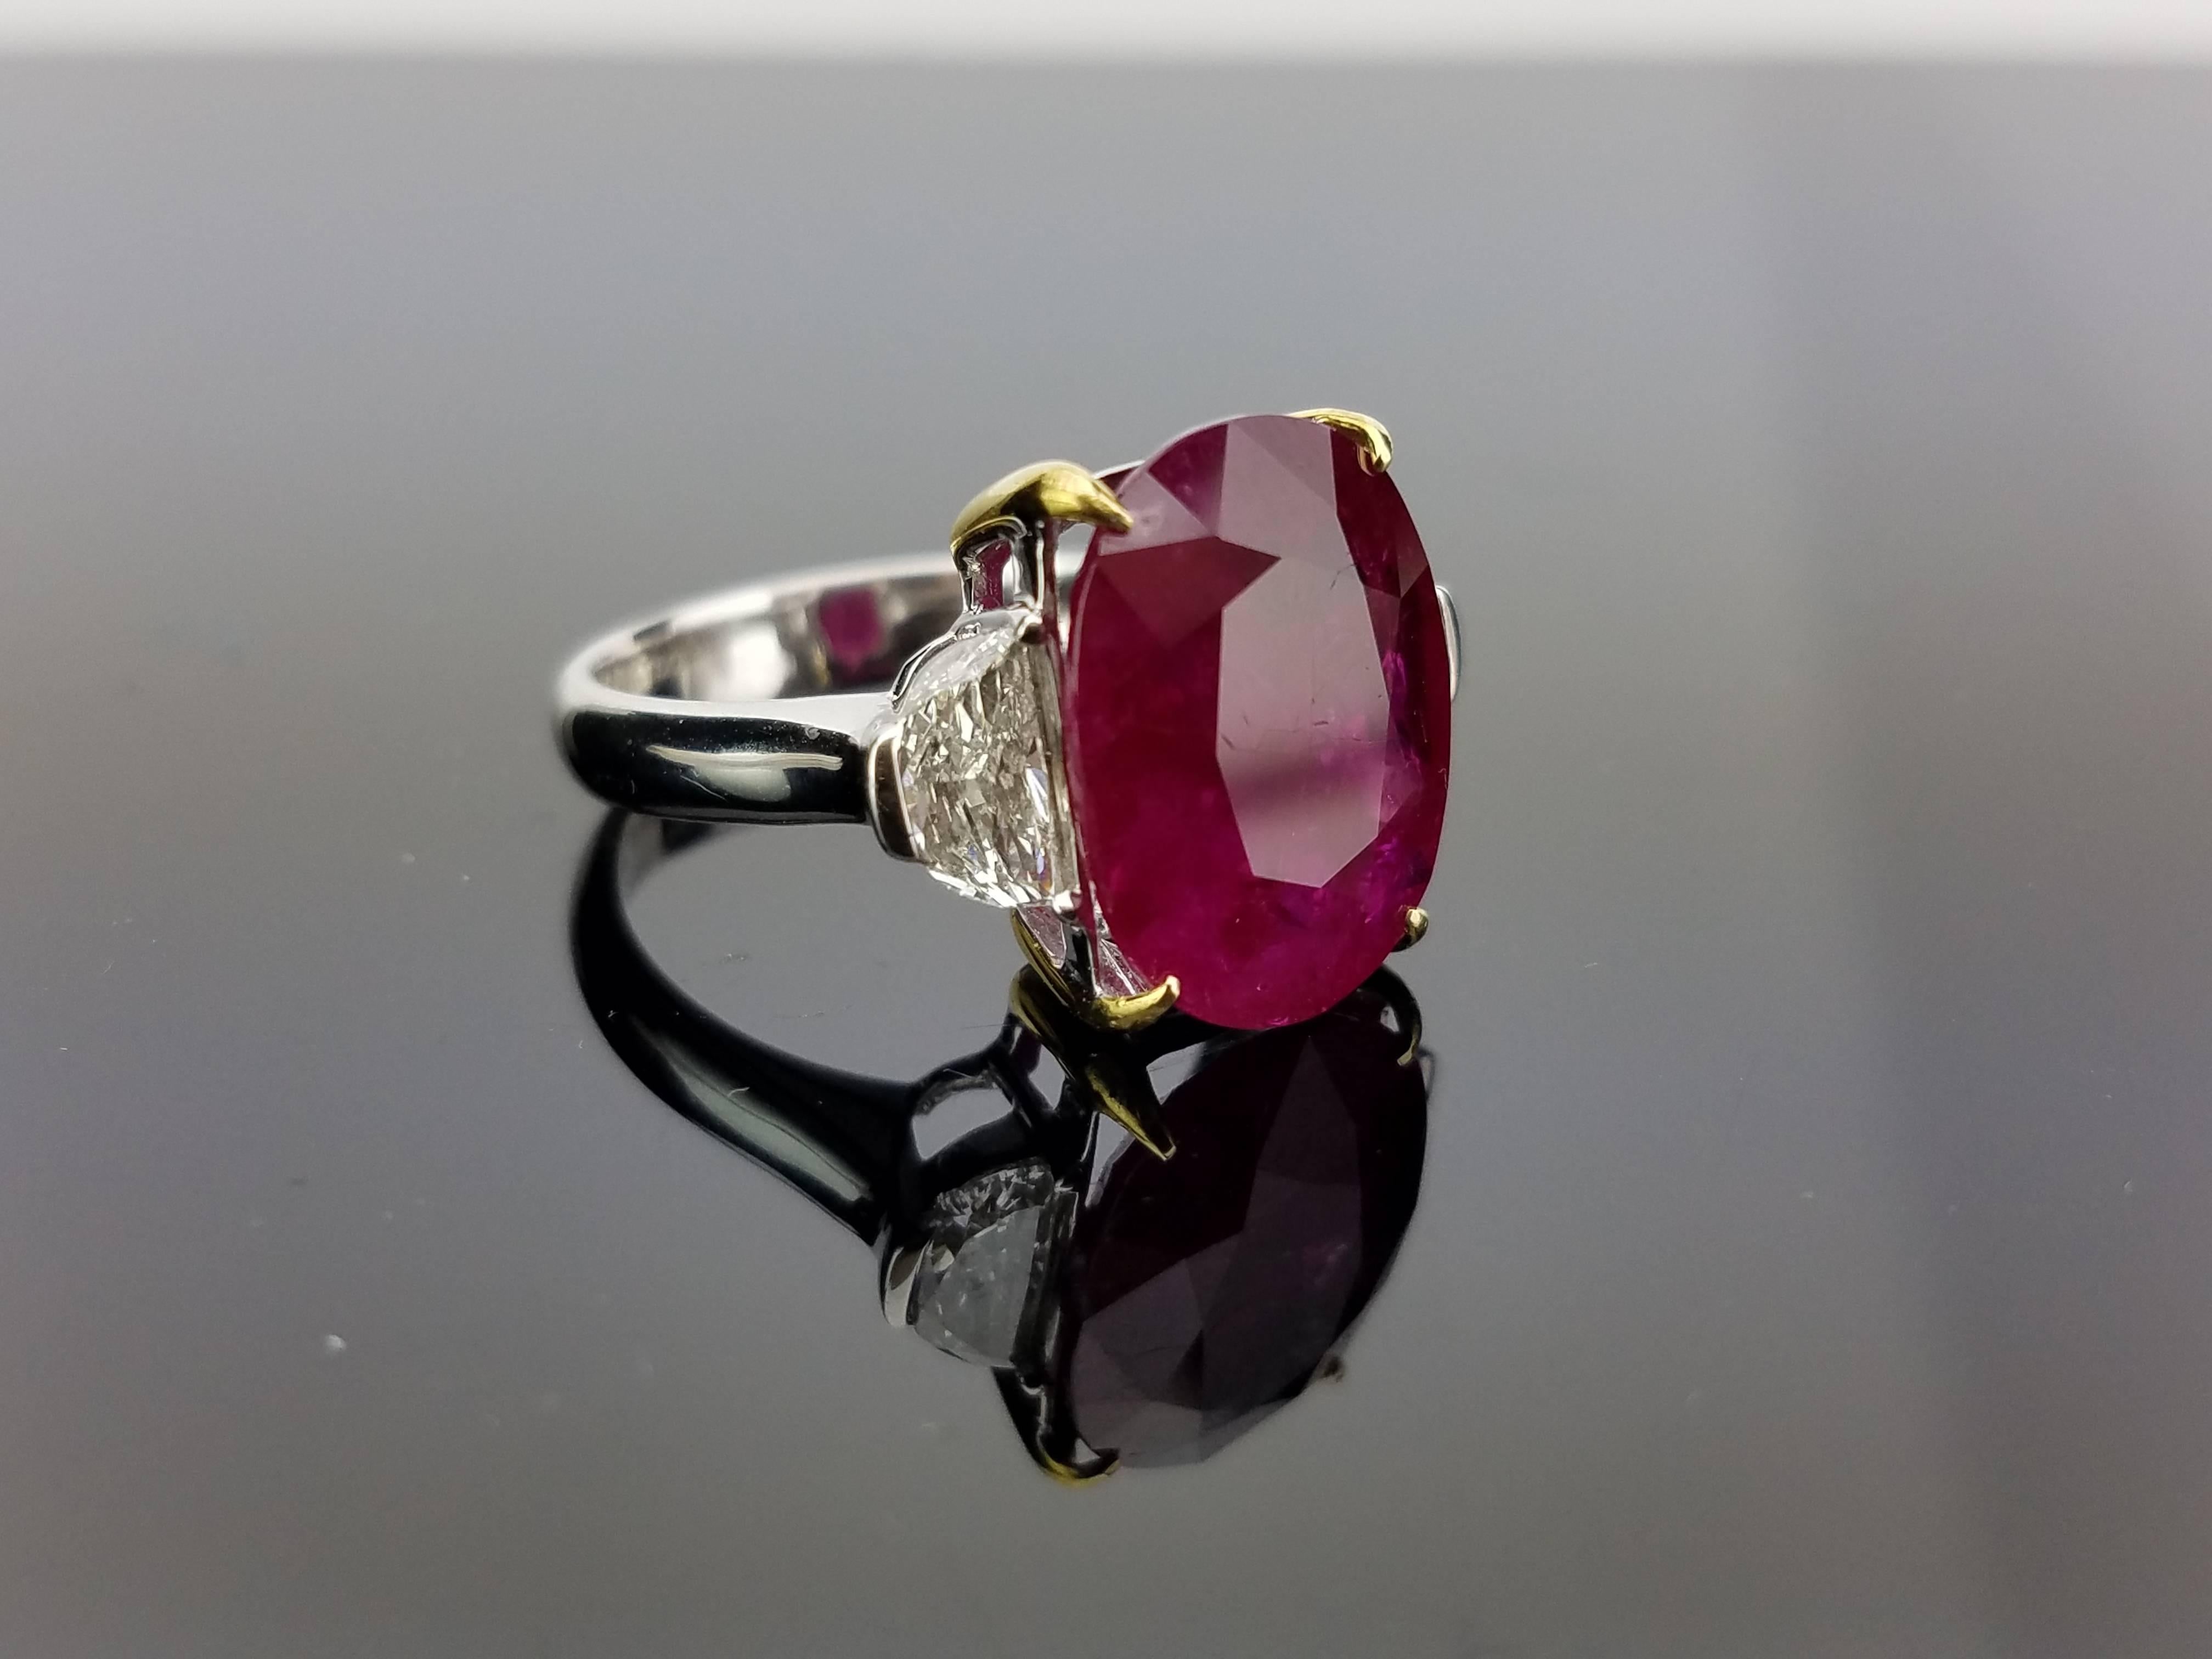 No heat Burma Ruby Ring with 2 half-moon Diamond side stones on 18K White Gold hoop

Center Stone Details: 
Stone: Burma Ruby (no heat)
Cut: Oval
Weight: 8.00 carat

Diamond Details: 
Cut: 2 x Half Moon
Total Carat Weight: 0.83 carat
Quality: VS ,